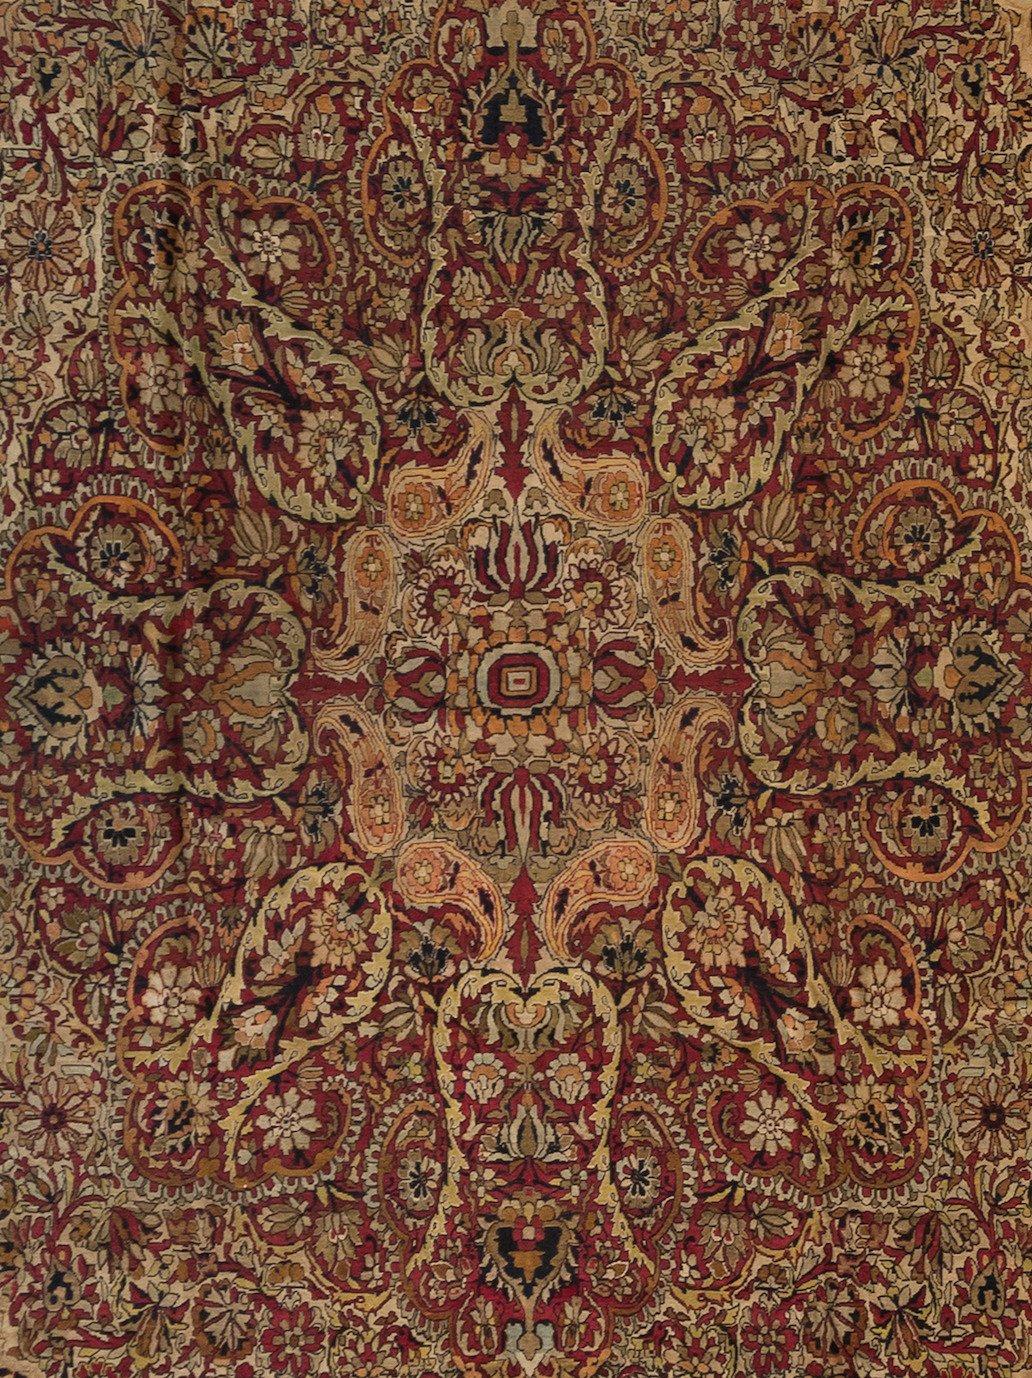 The carpets produced in Lavar are often included in the general category of Kerman rugs (as Lavar is a small village located 80 miles north of Kerman), yet the reputation of this small town surpasses many larger cities. The village of Lavar has a